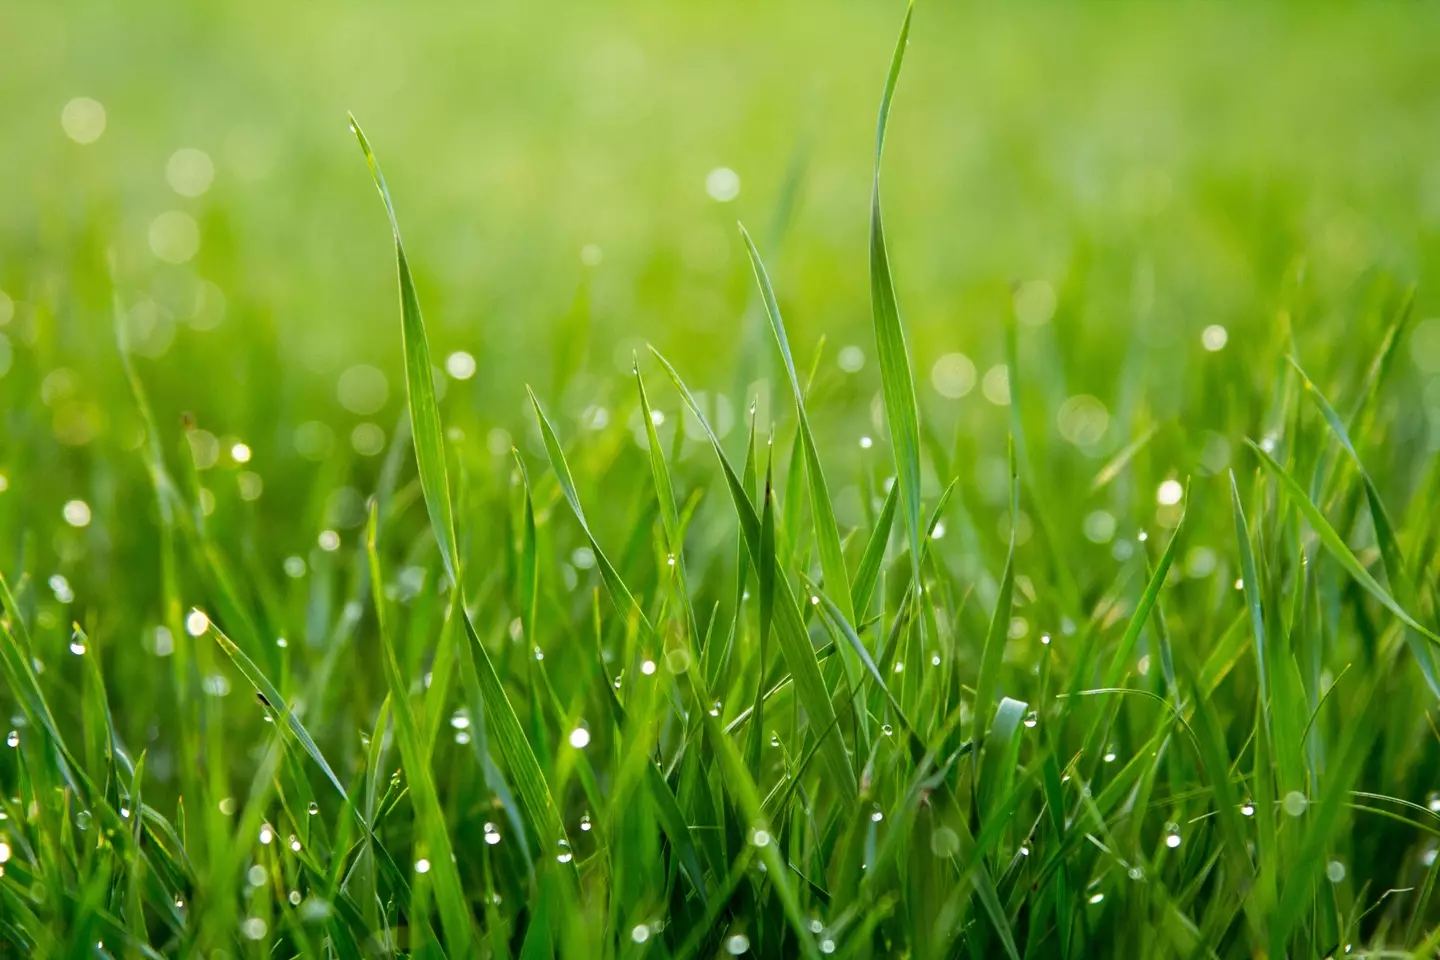 Grass could be the secret to getting your oven clean. (